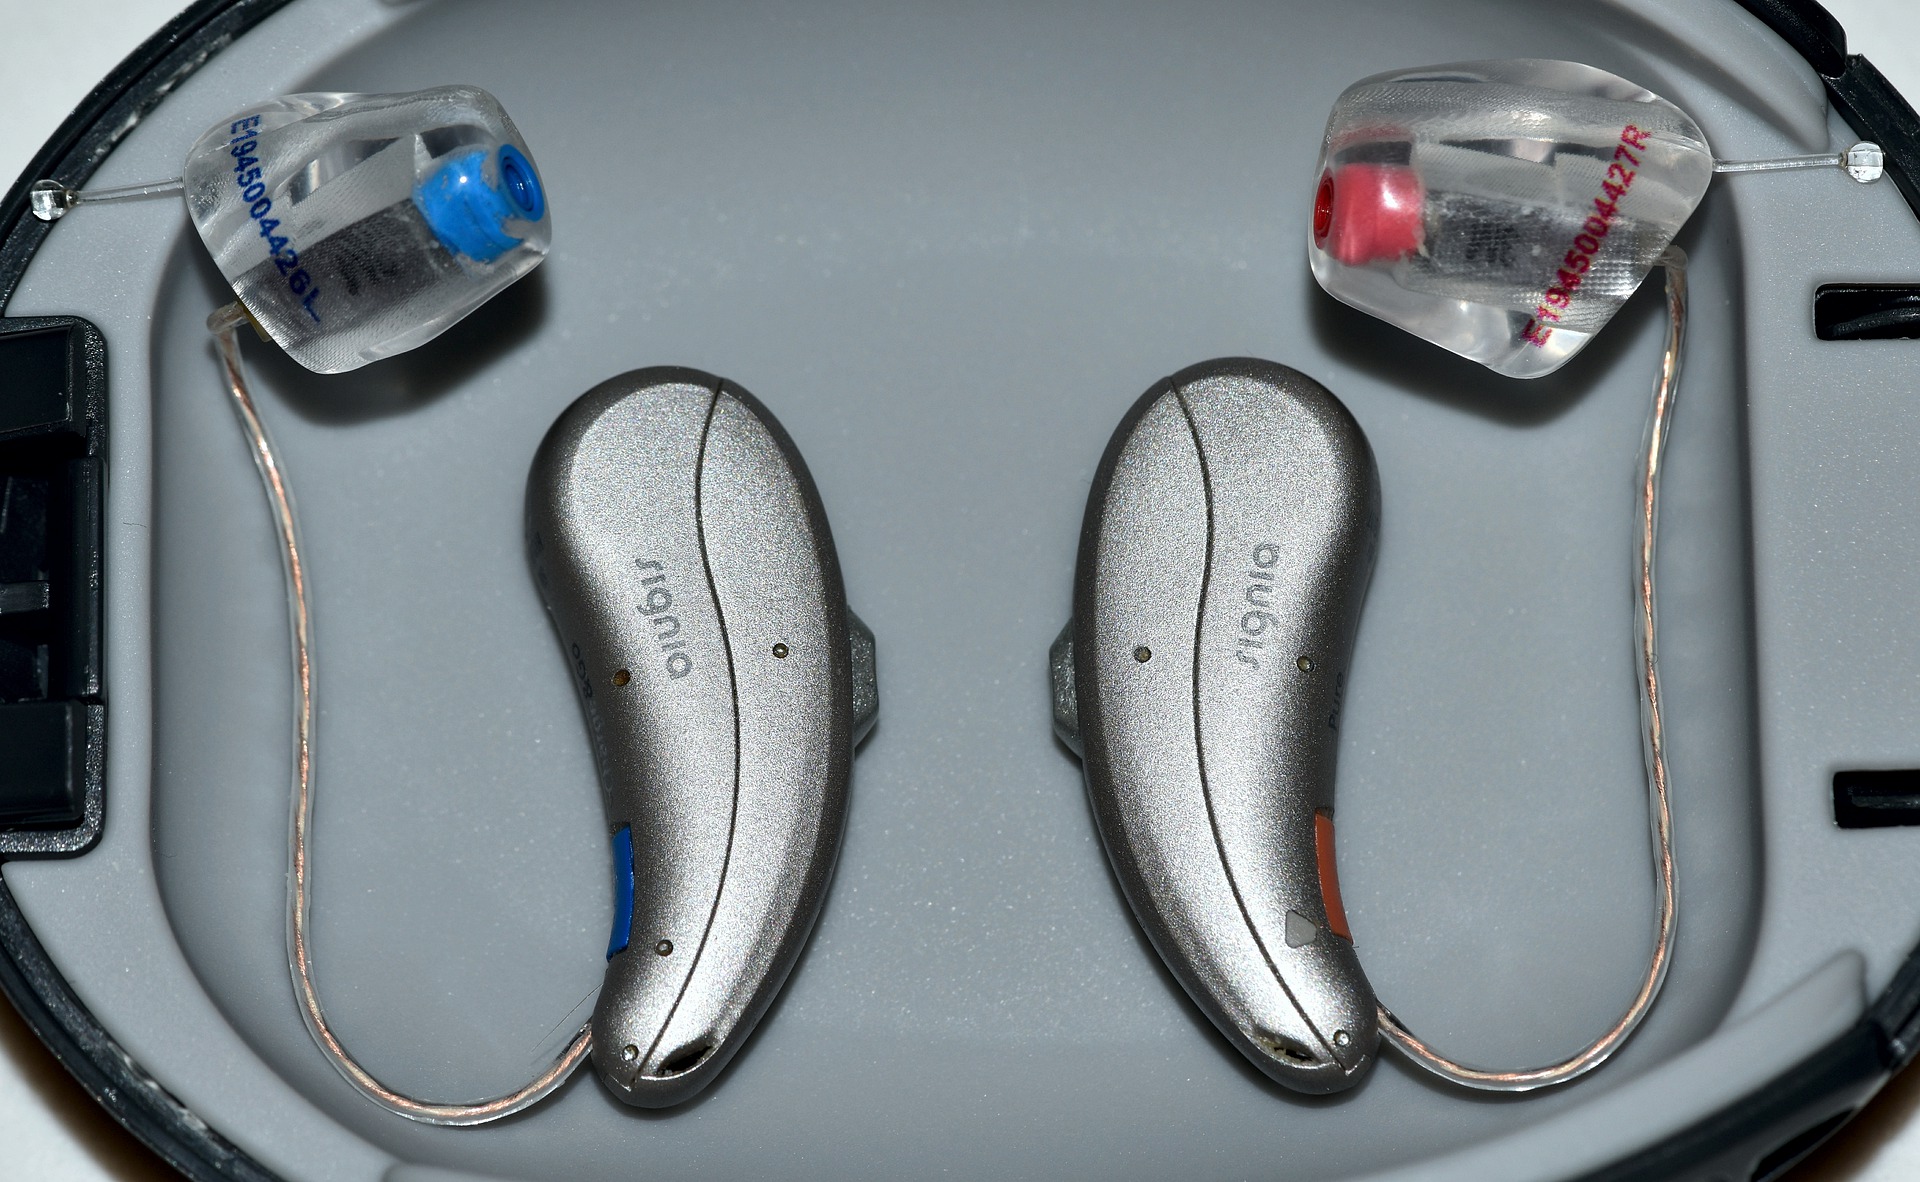 Hearing aid devices on the gray background. which brand of hearing aid is the best?